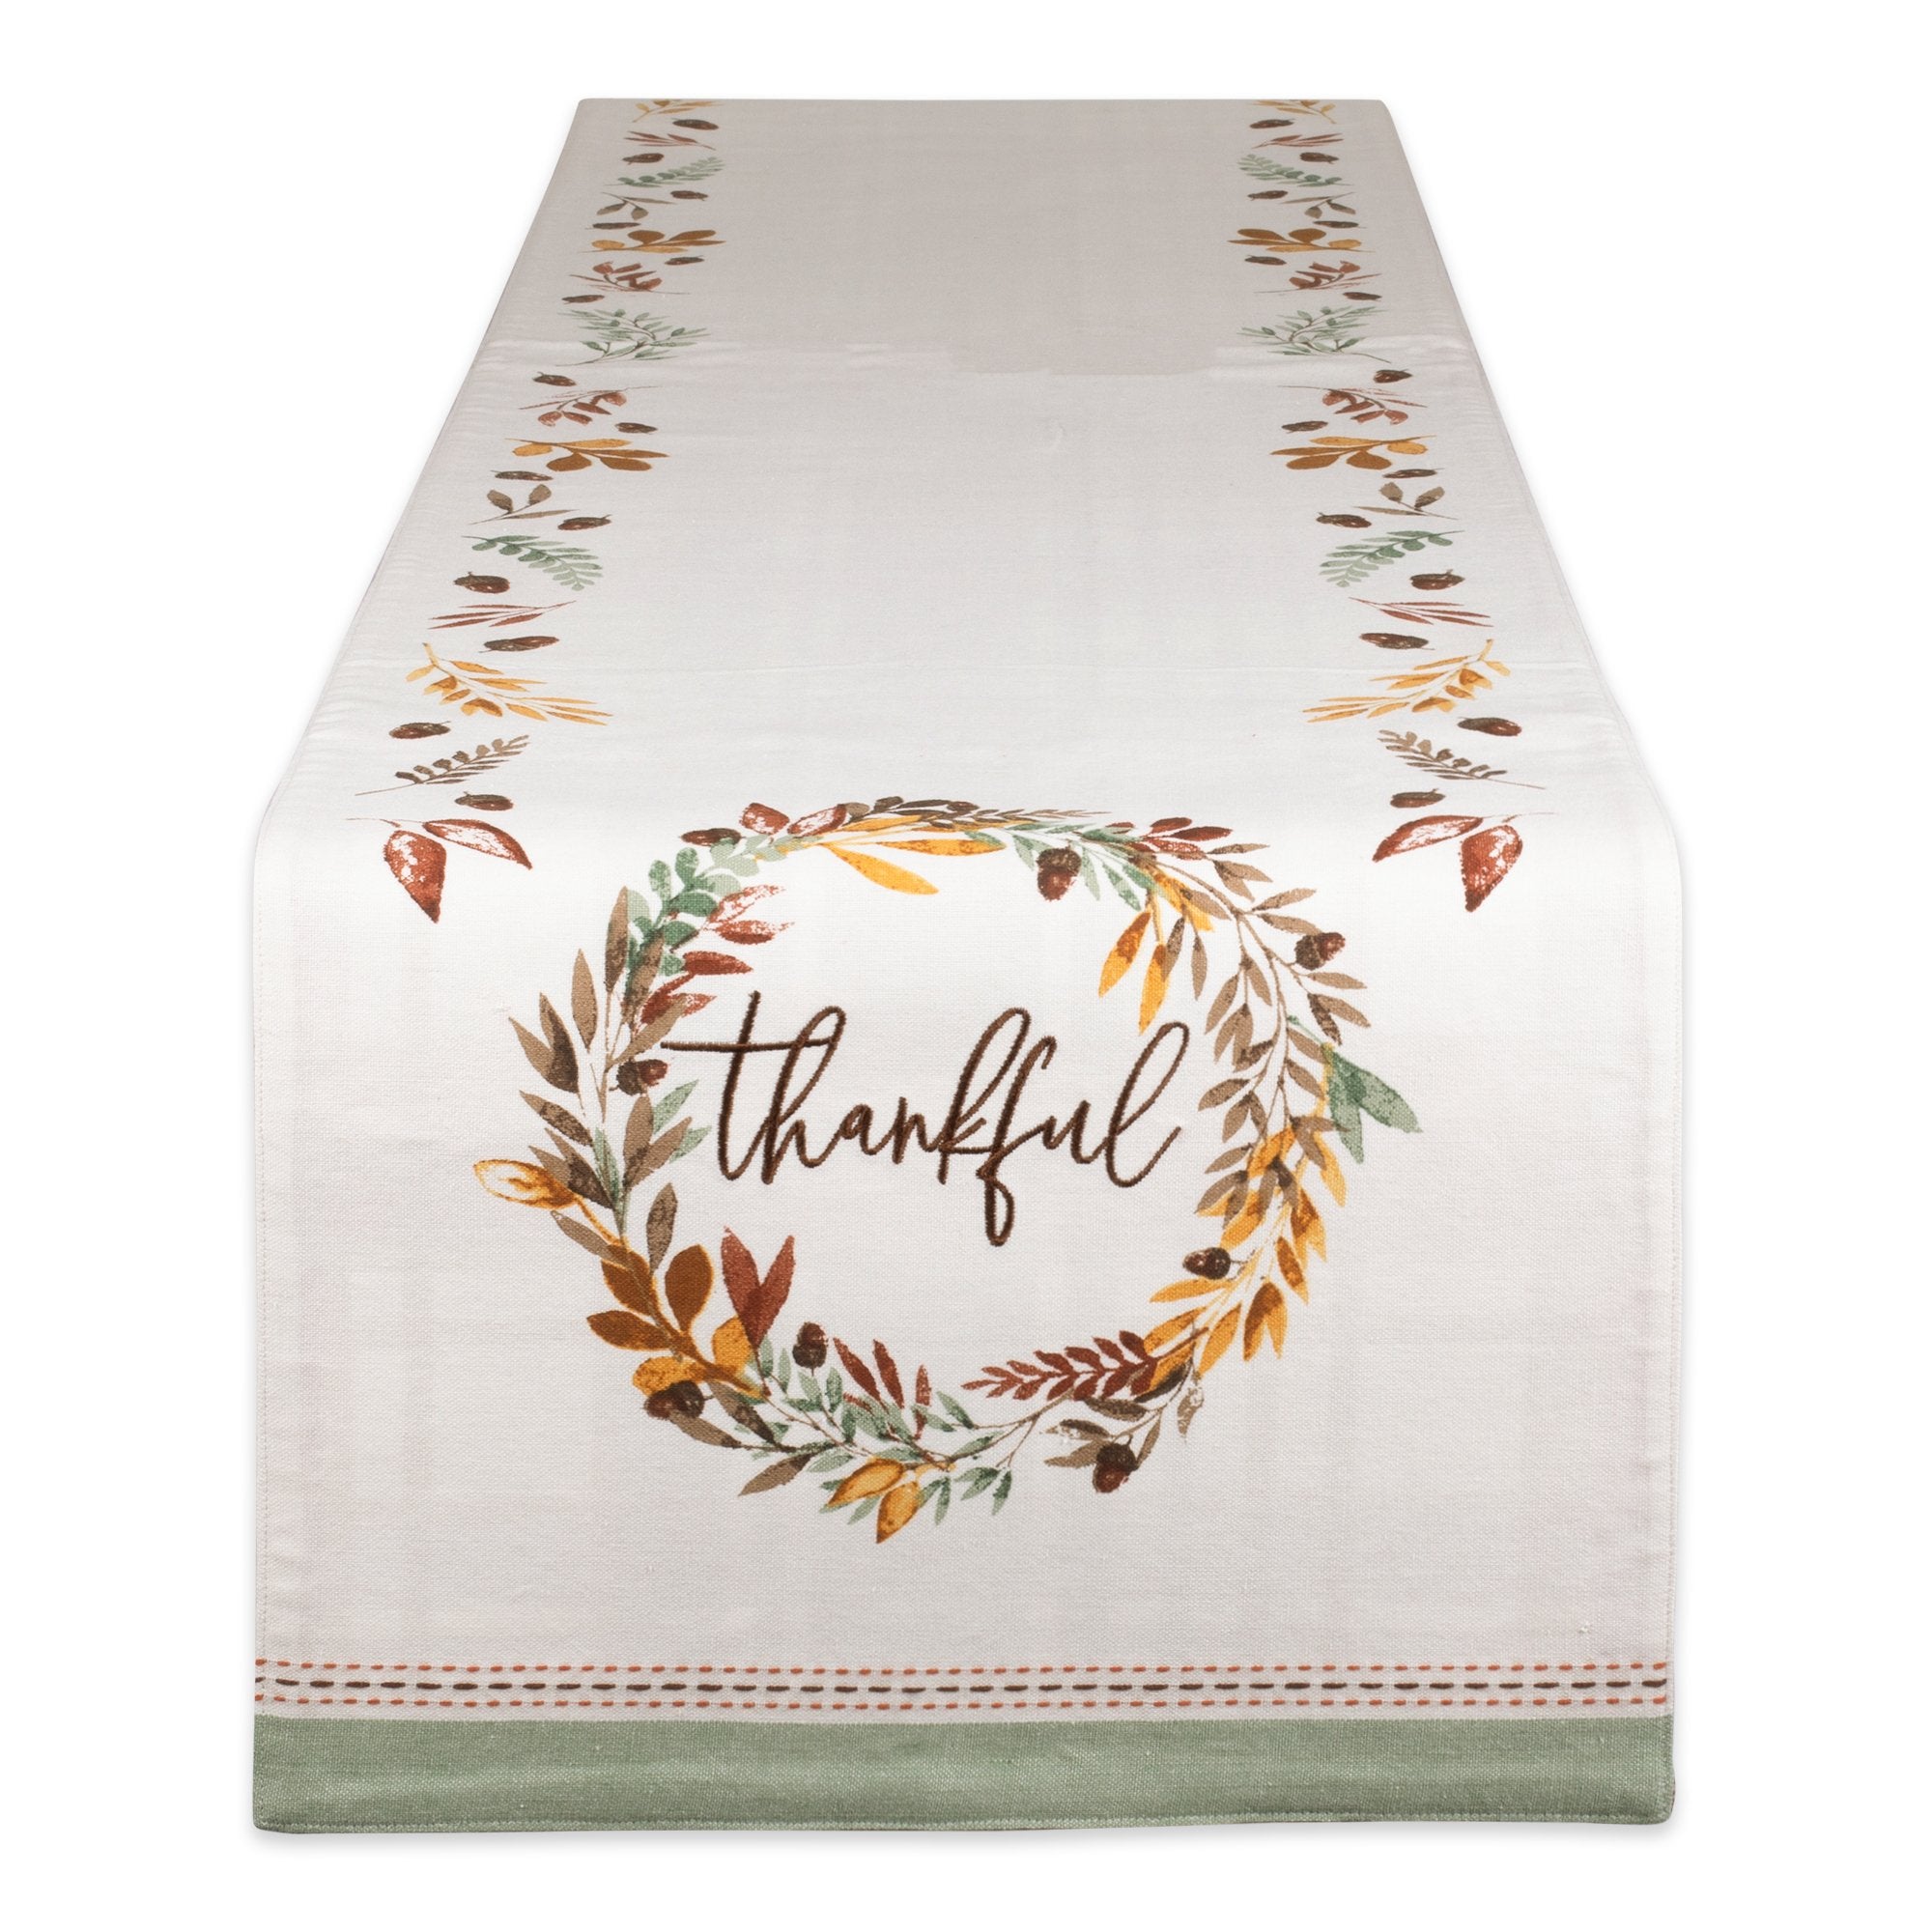 Thankful Autumn Wreath Embellished Table Runner – DII Design Imports